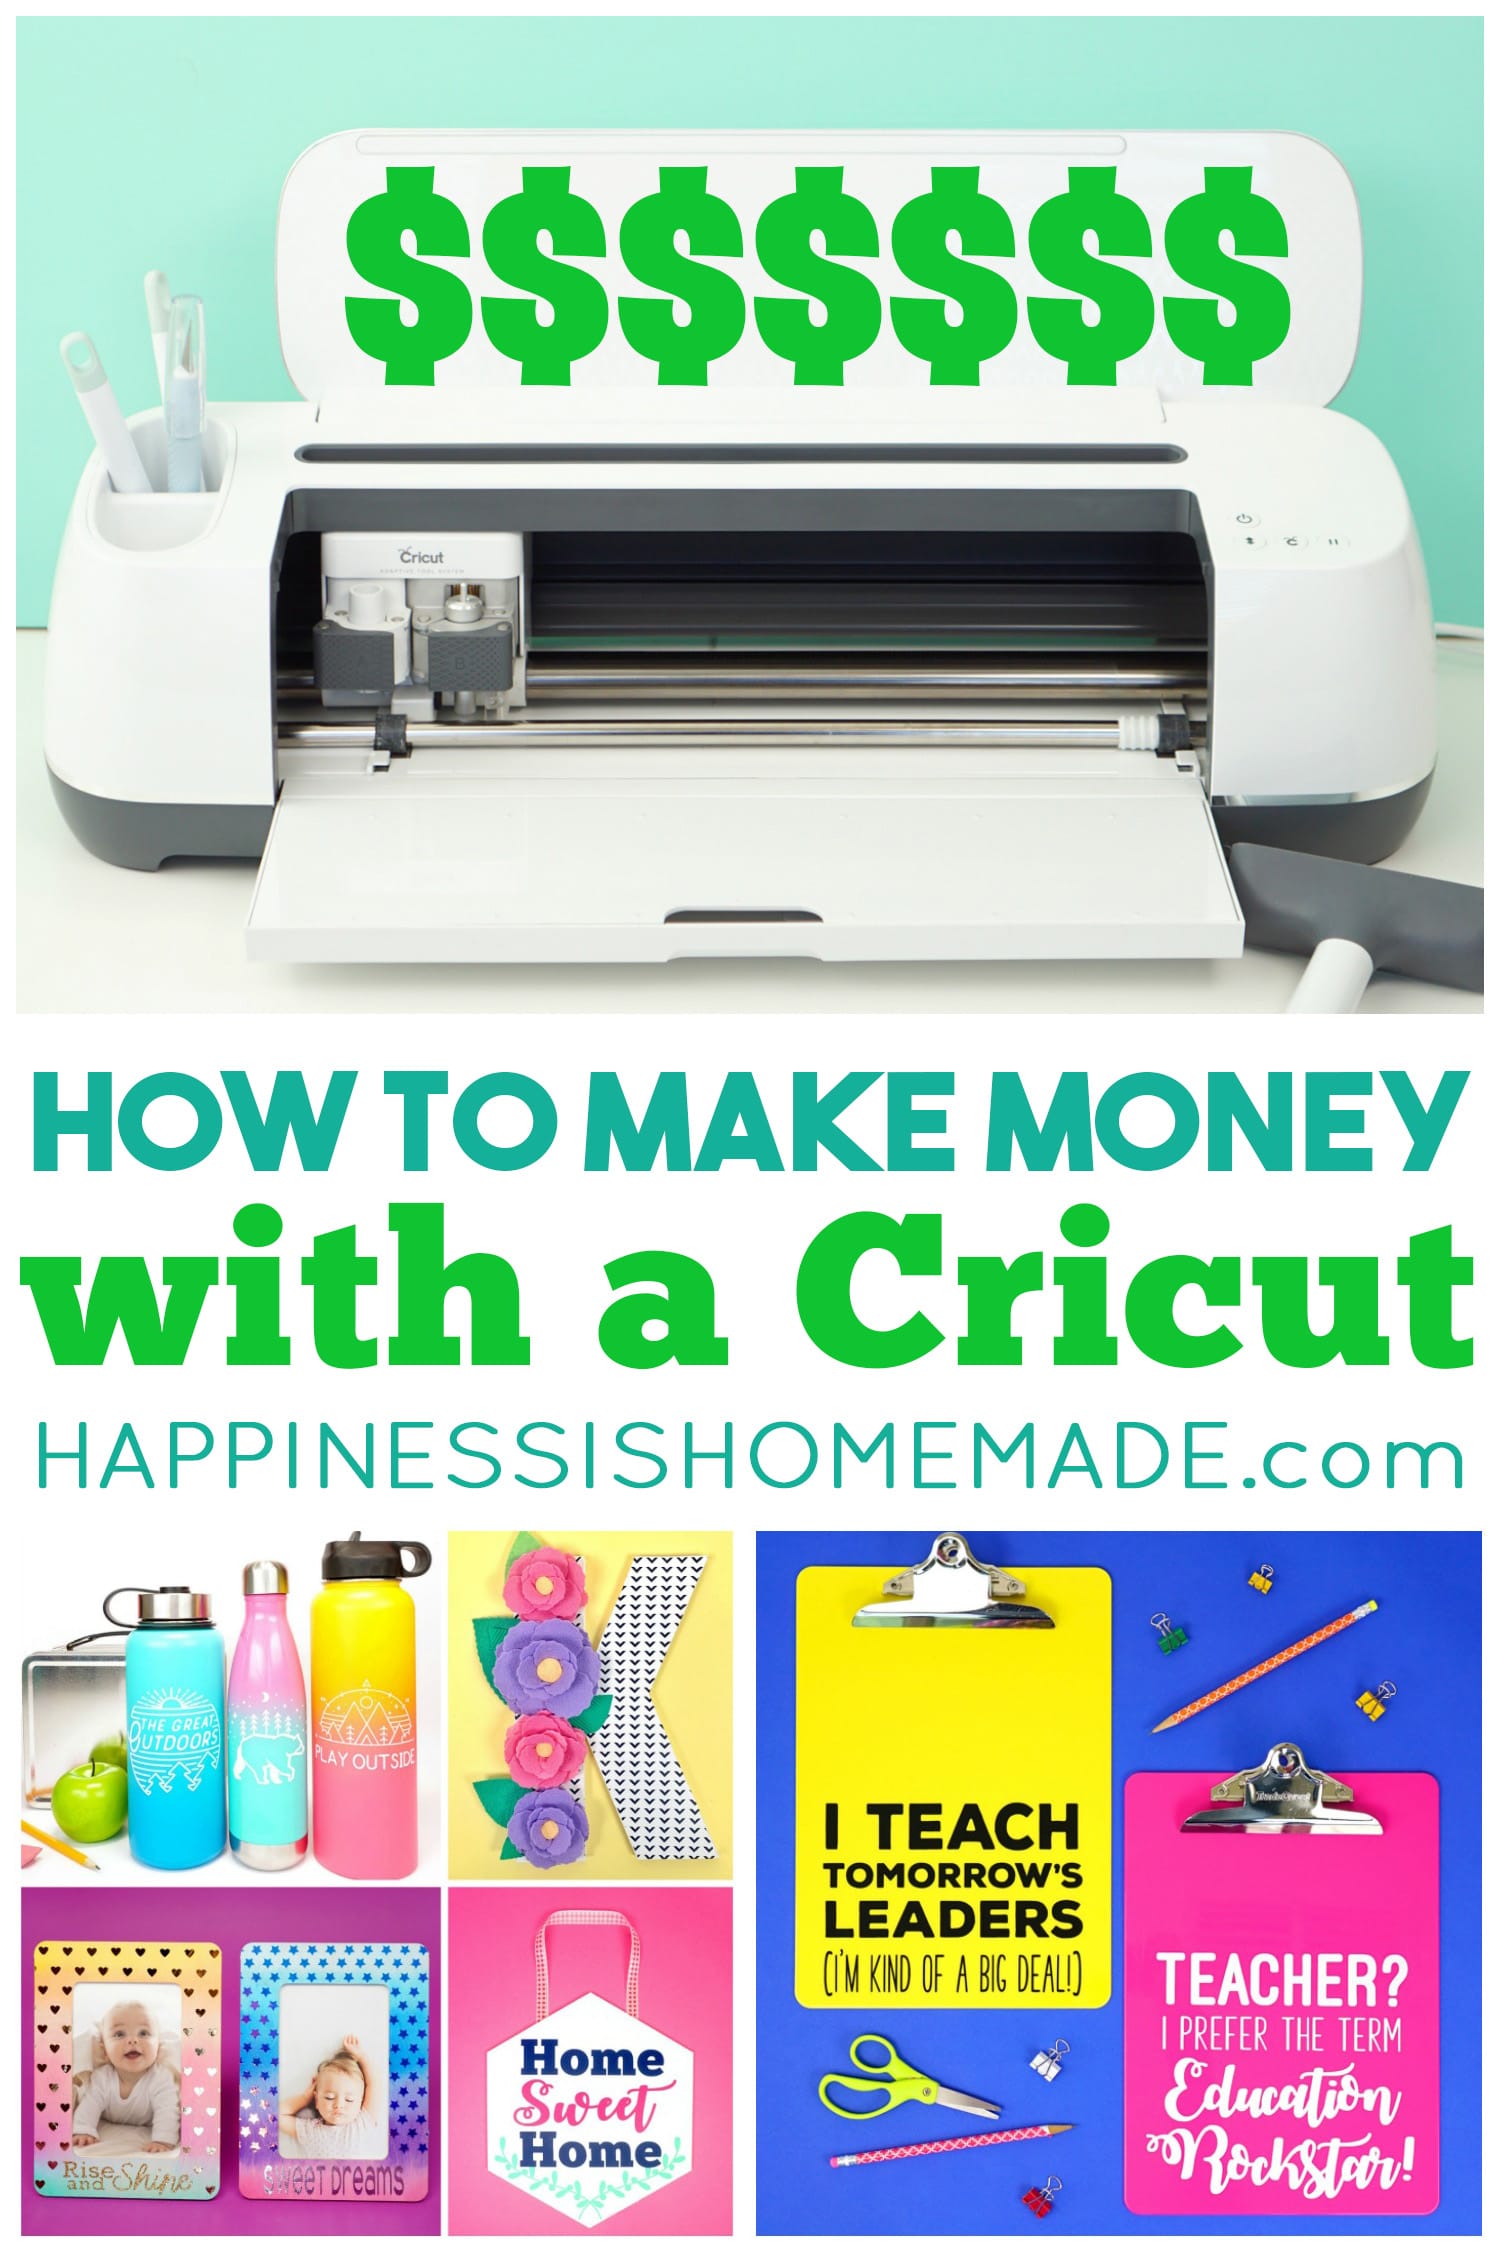 Scoring Custom Projects with your Cricut 